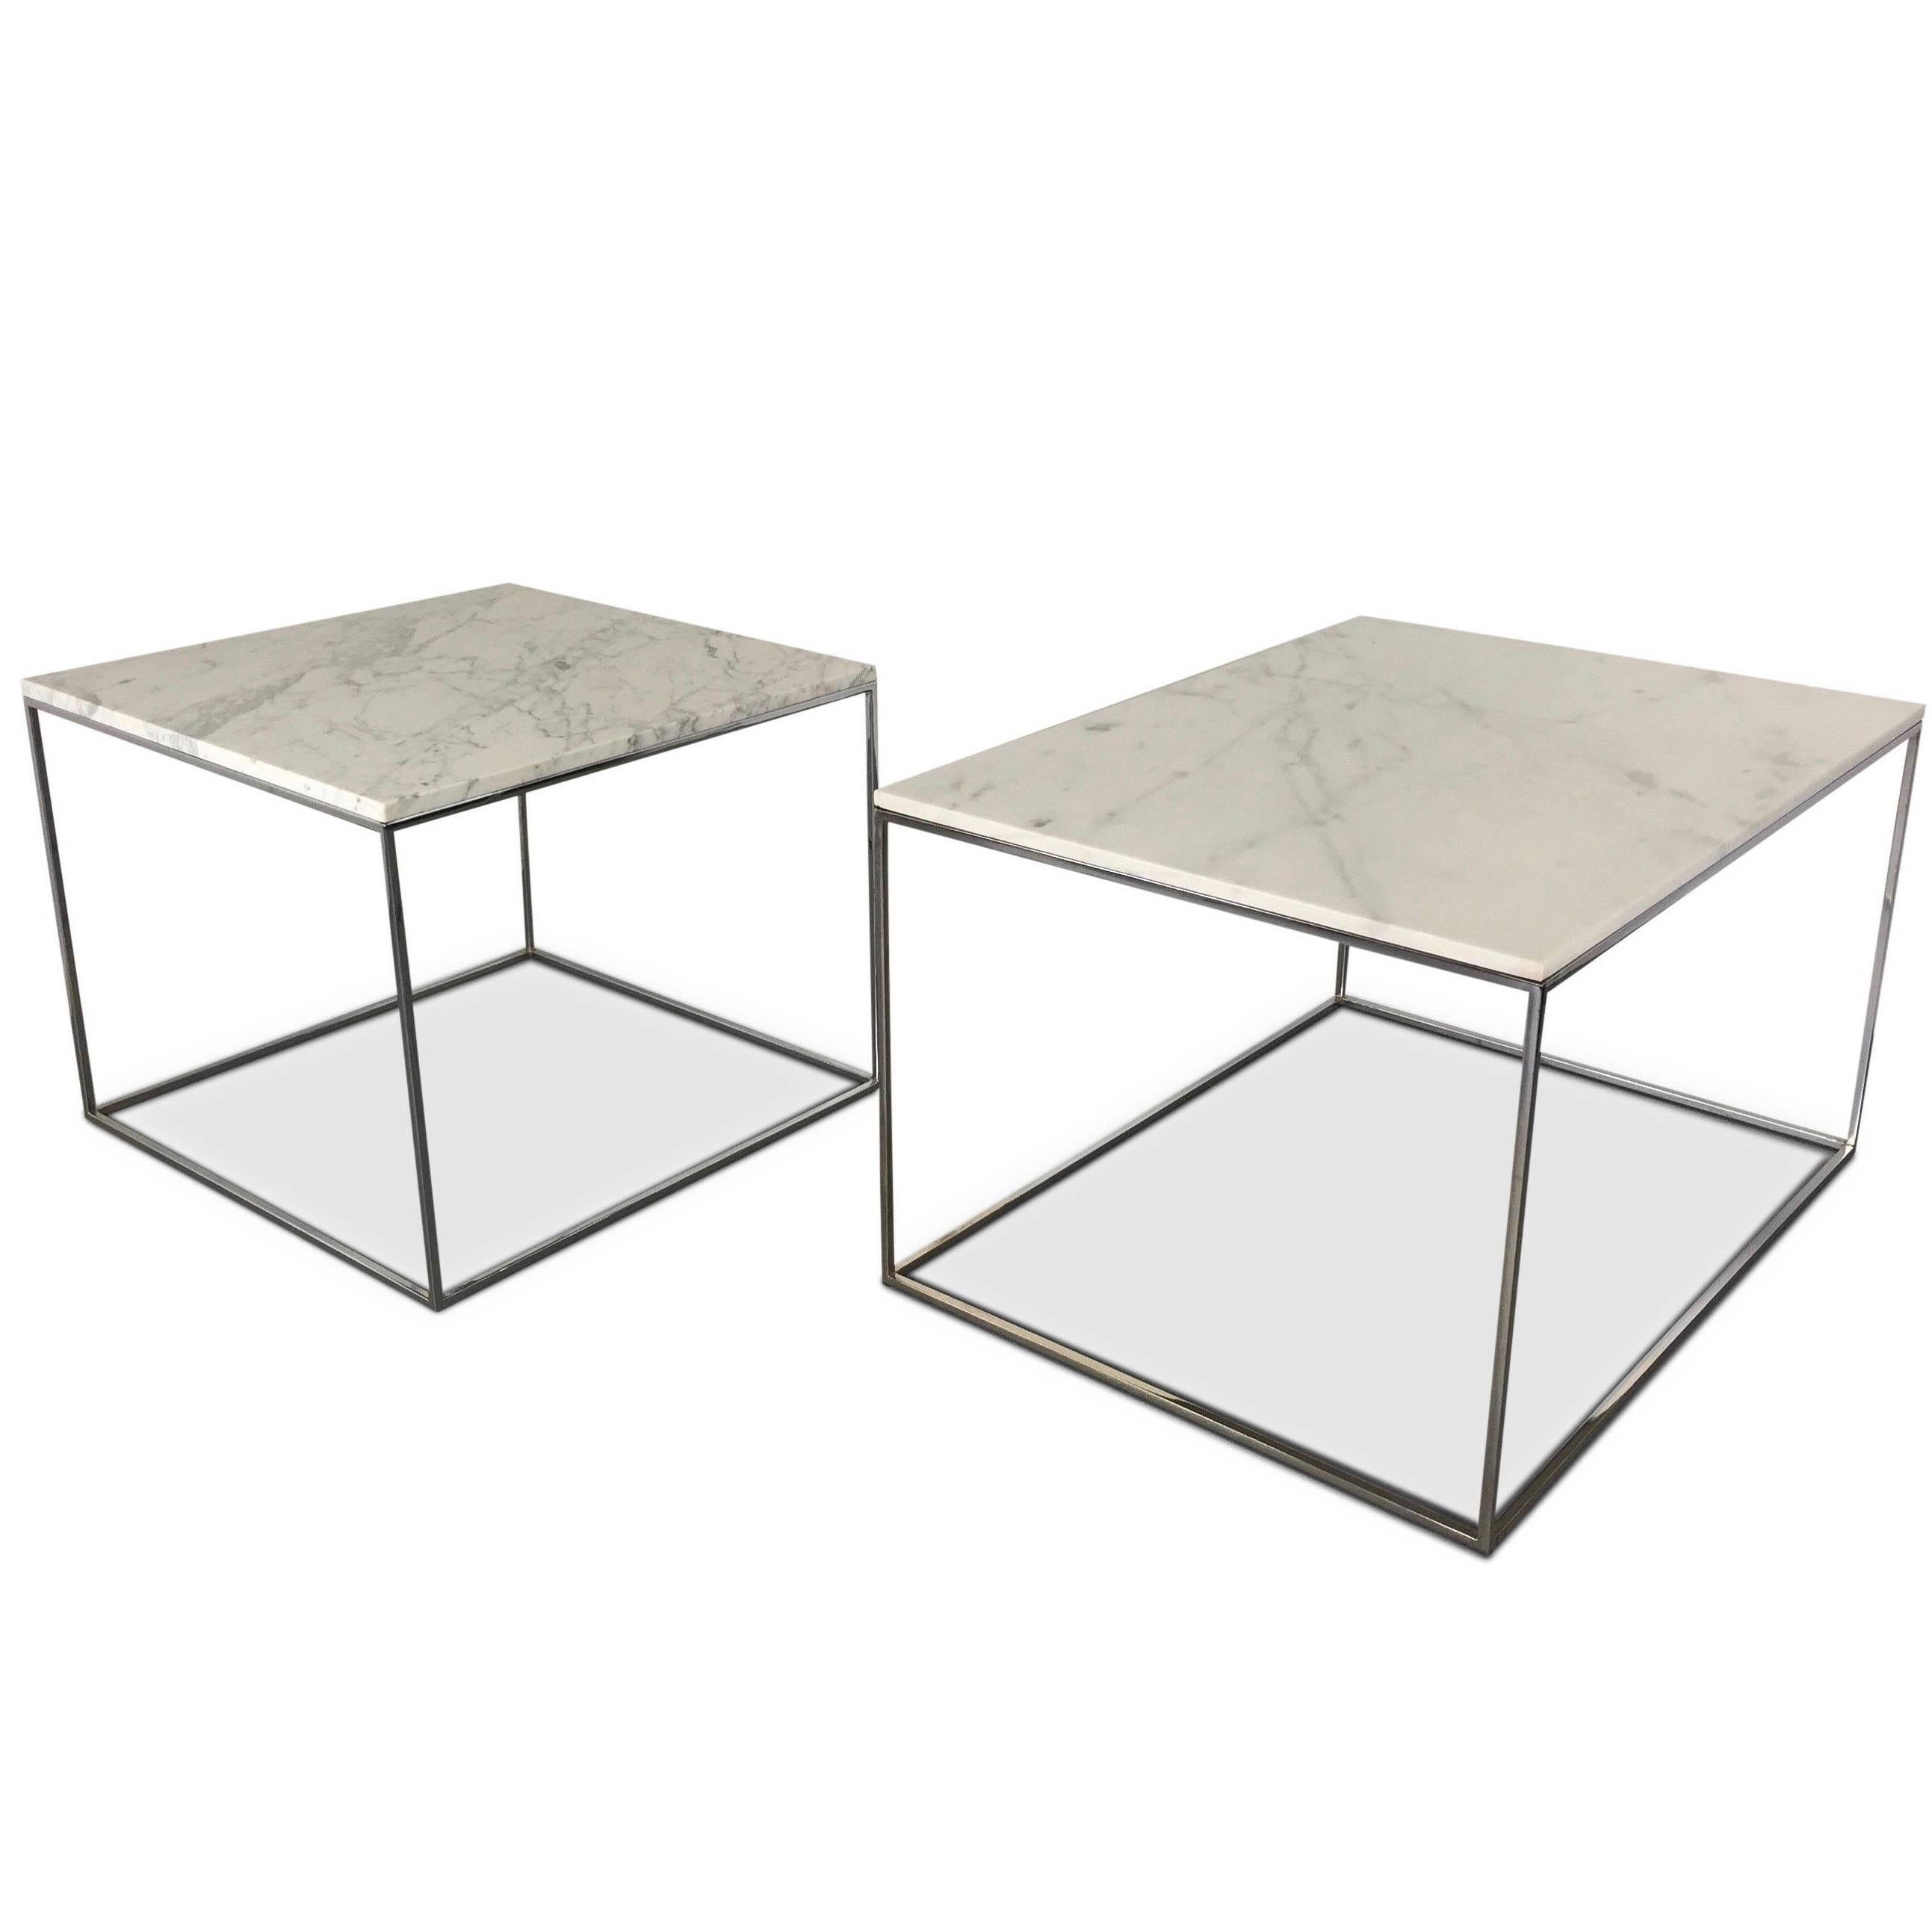 Milo Baughman for Thayer Coggin Chrome & Marble Occasional Tables, Mid Century